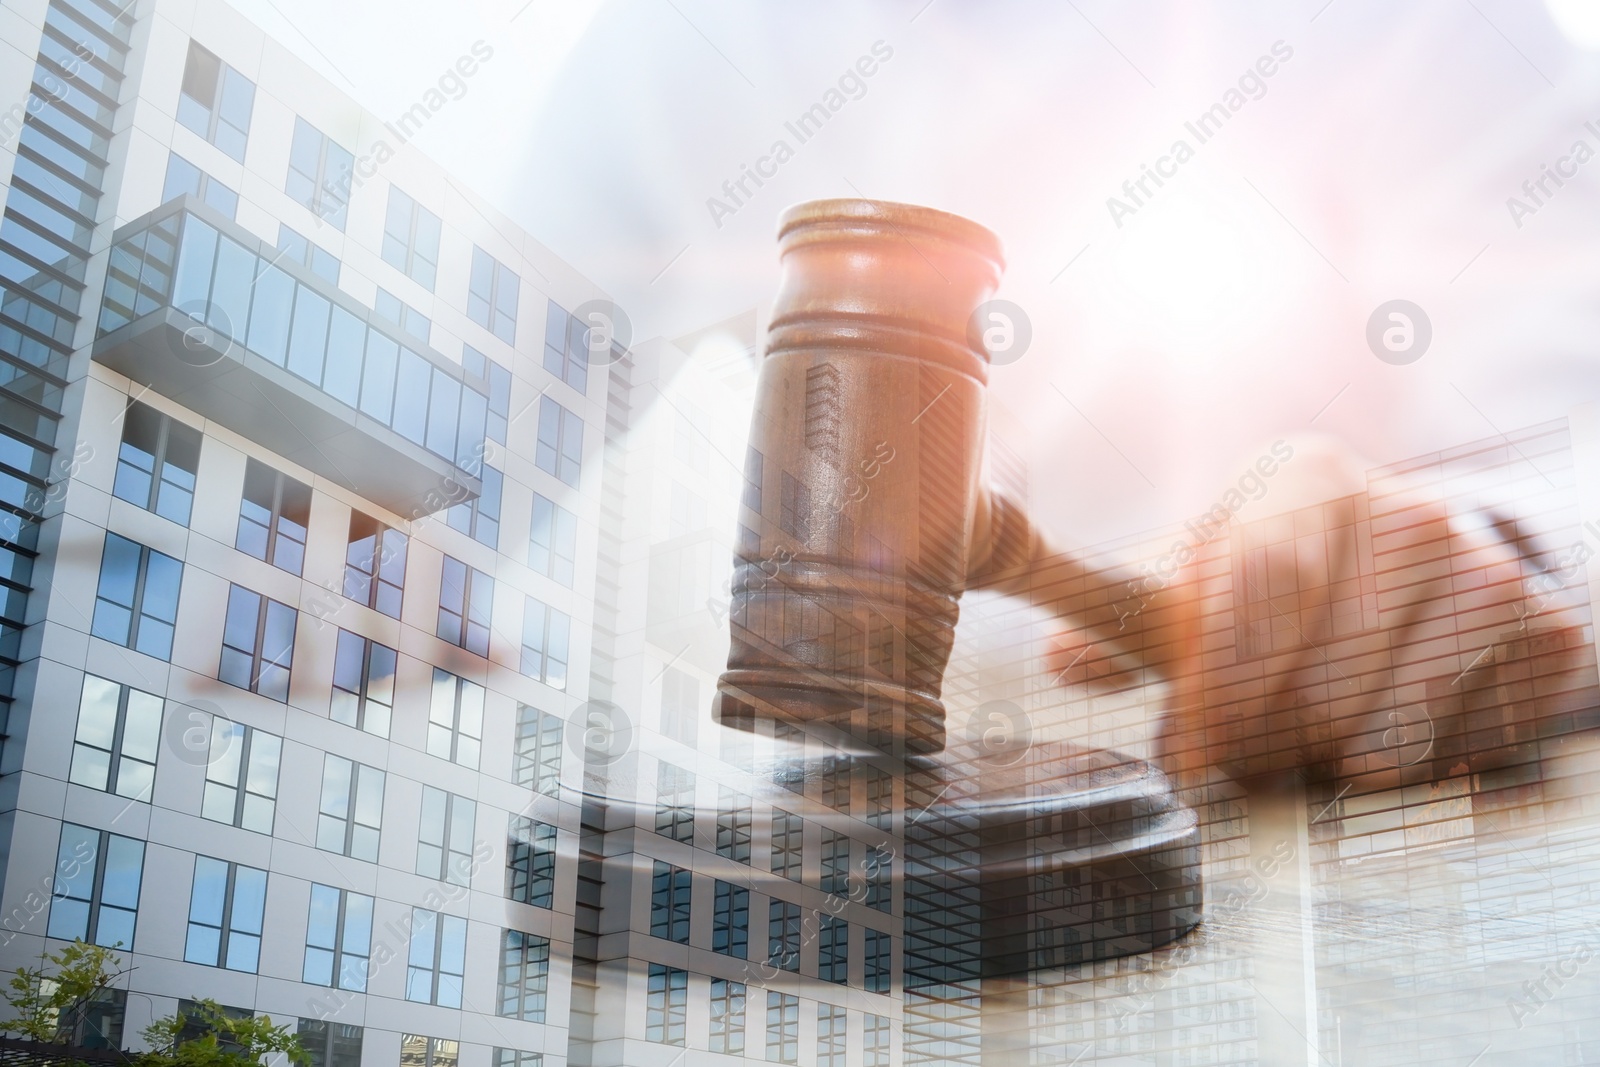 Image of Law protection. Double exposure of judge with gavel and building